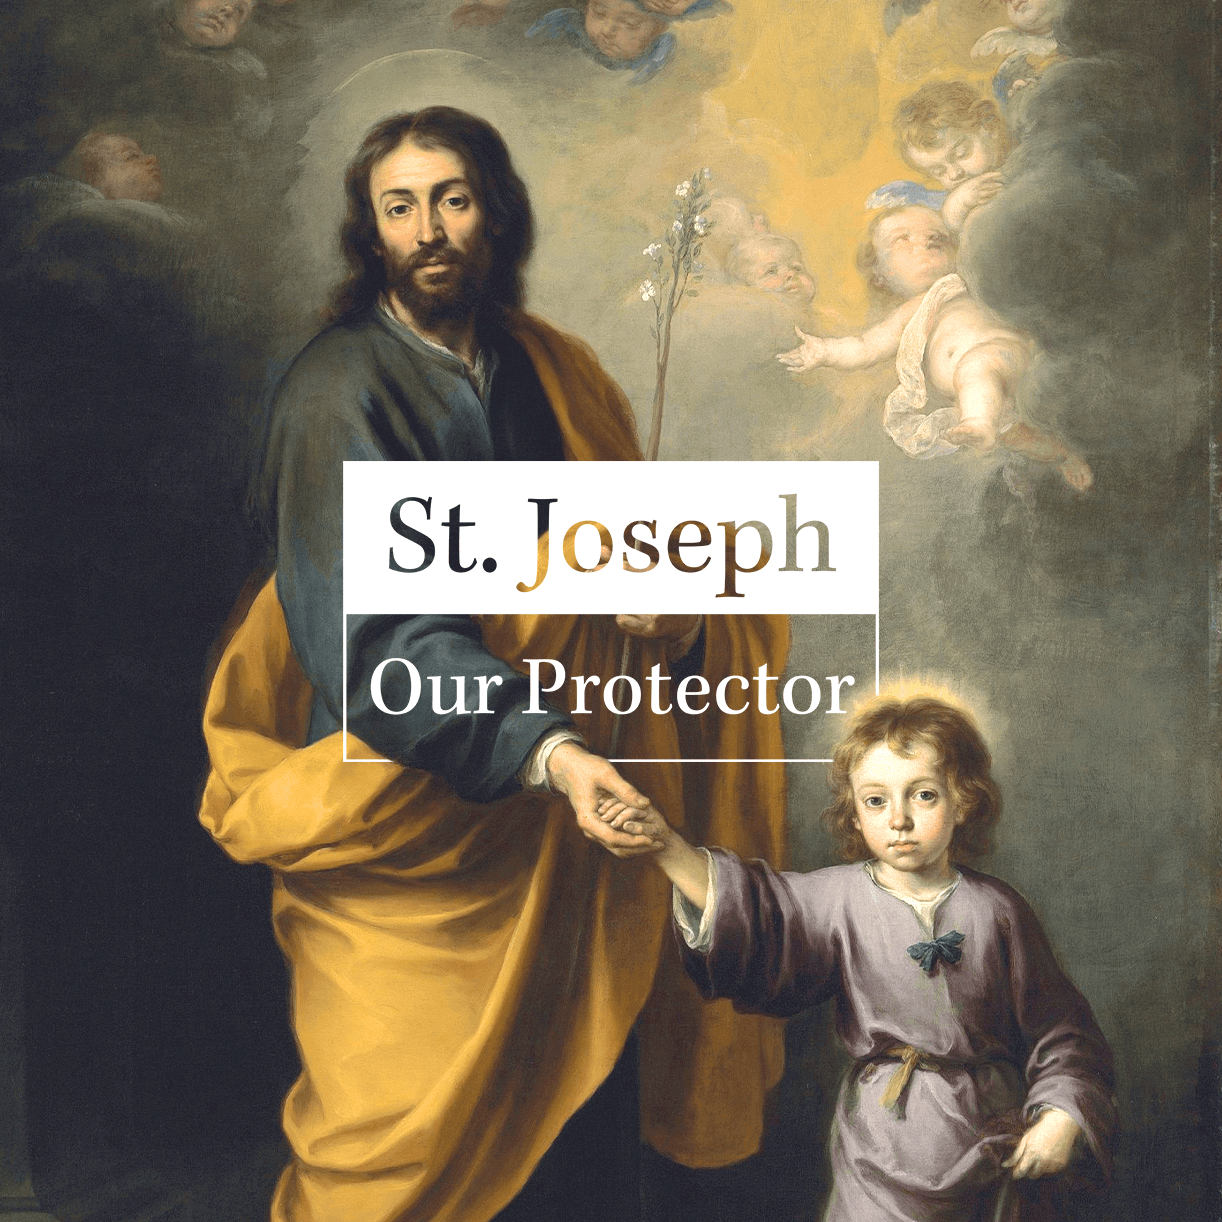 St. Joseph: Our Protector